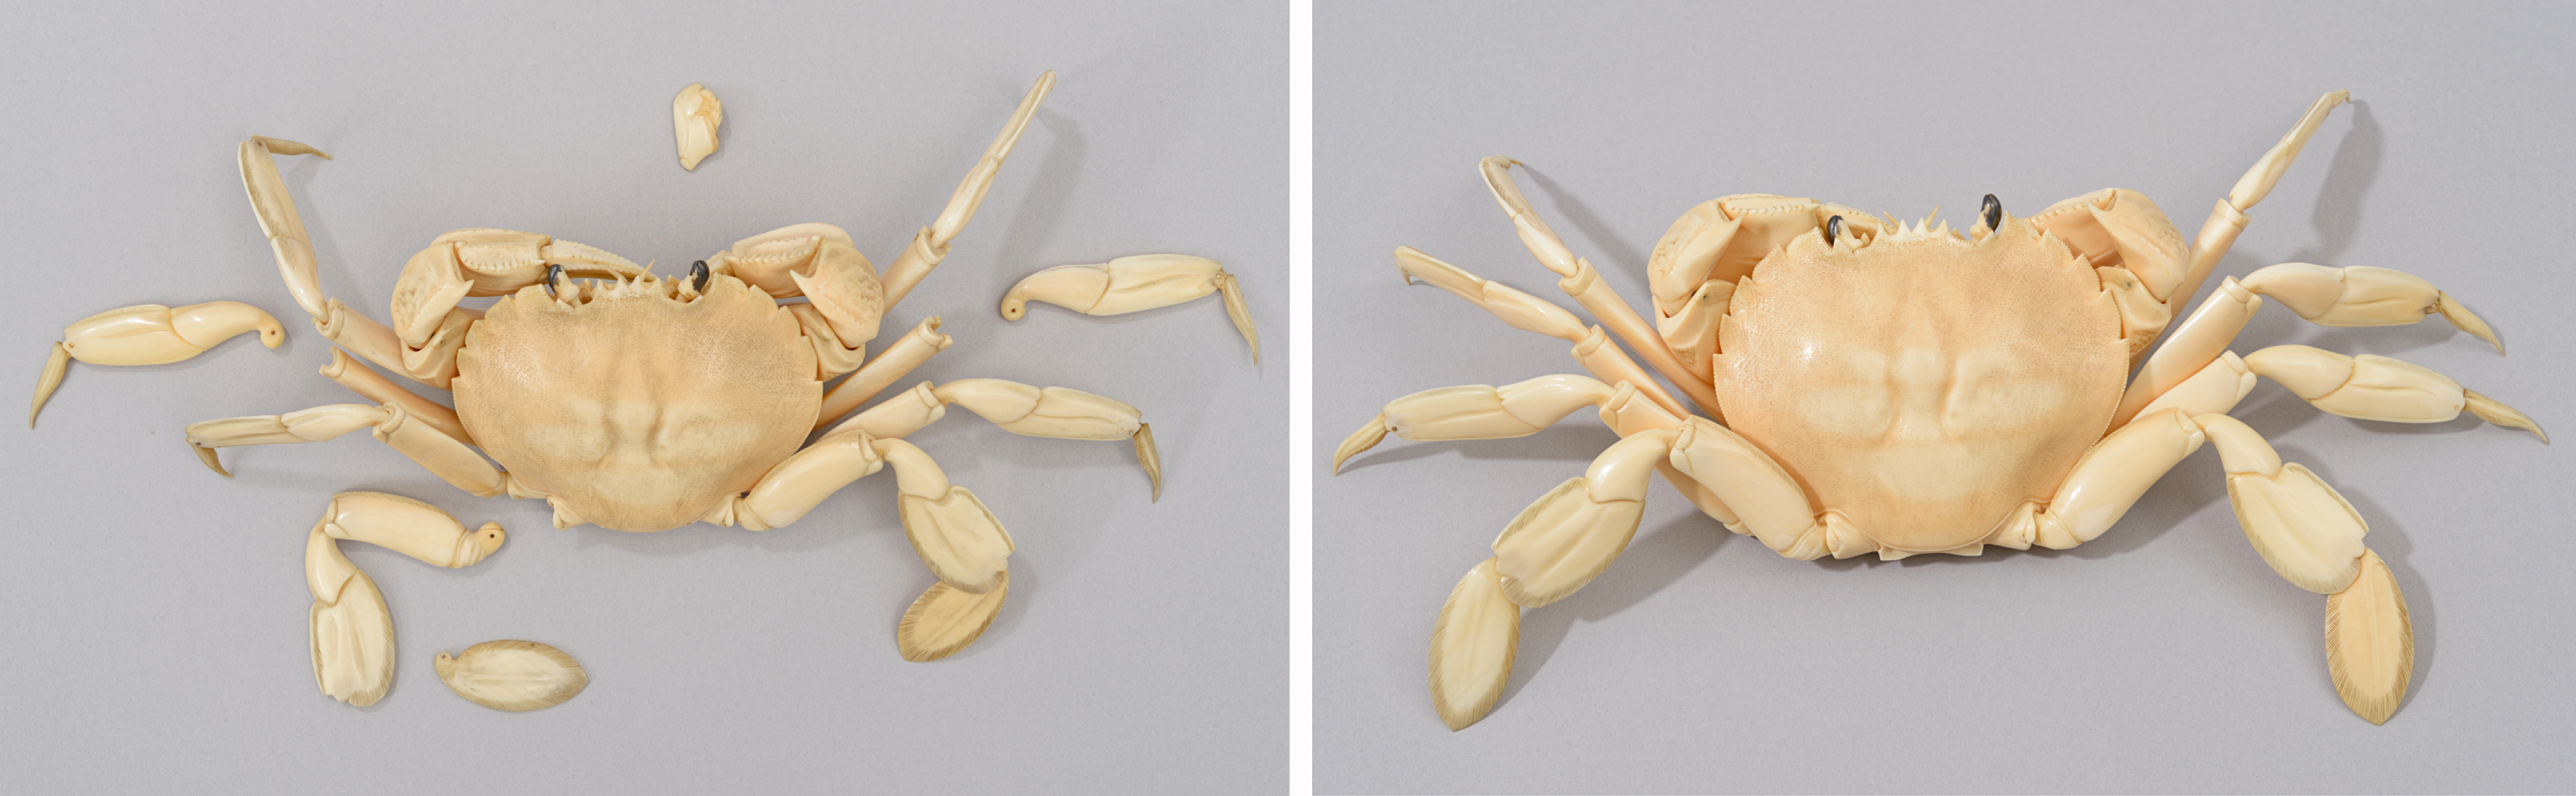 Left: top view of the crab with ivory covered with a layer of dust and dirt, and four sections of legs and one part of mouth detached. Right: top view of the crab after cleaning and repairs: the ivory has regained its natural warm colour and lustre